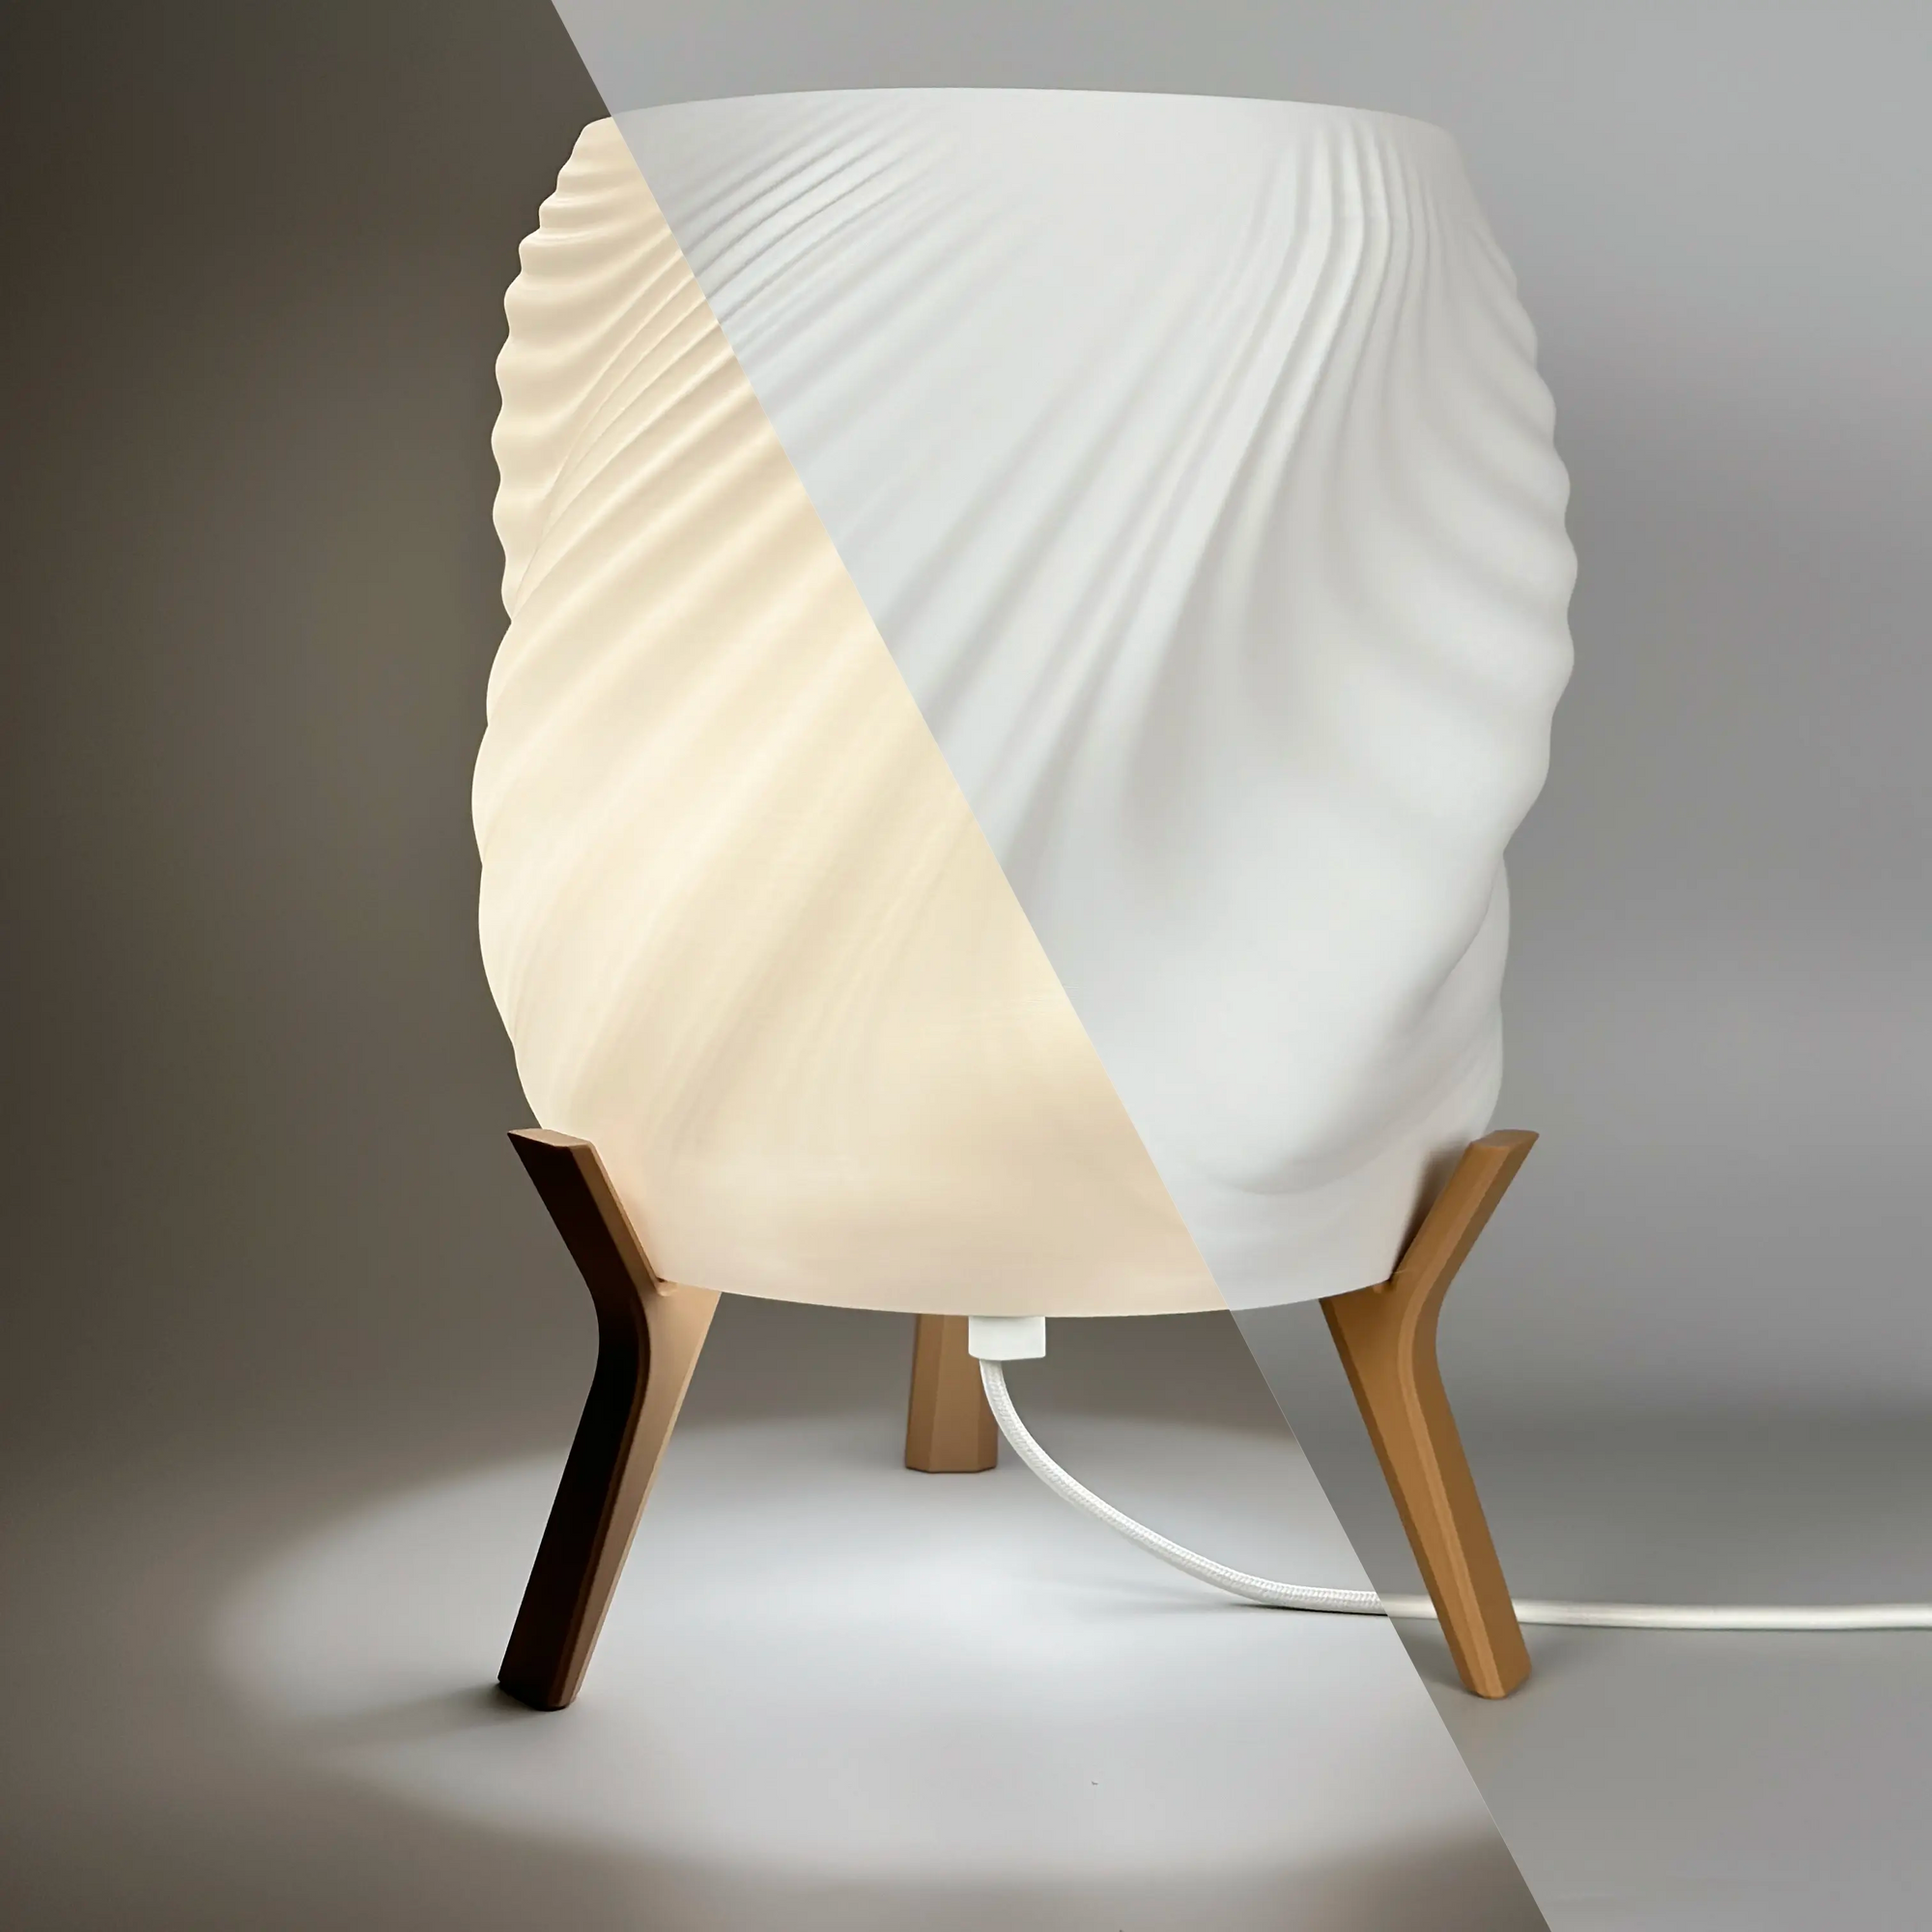 EleganceSweep Minimalist Table Lamp - Bedside Lamp in cotton white shade and wood brown base. Half image on and half image off.